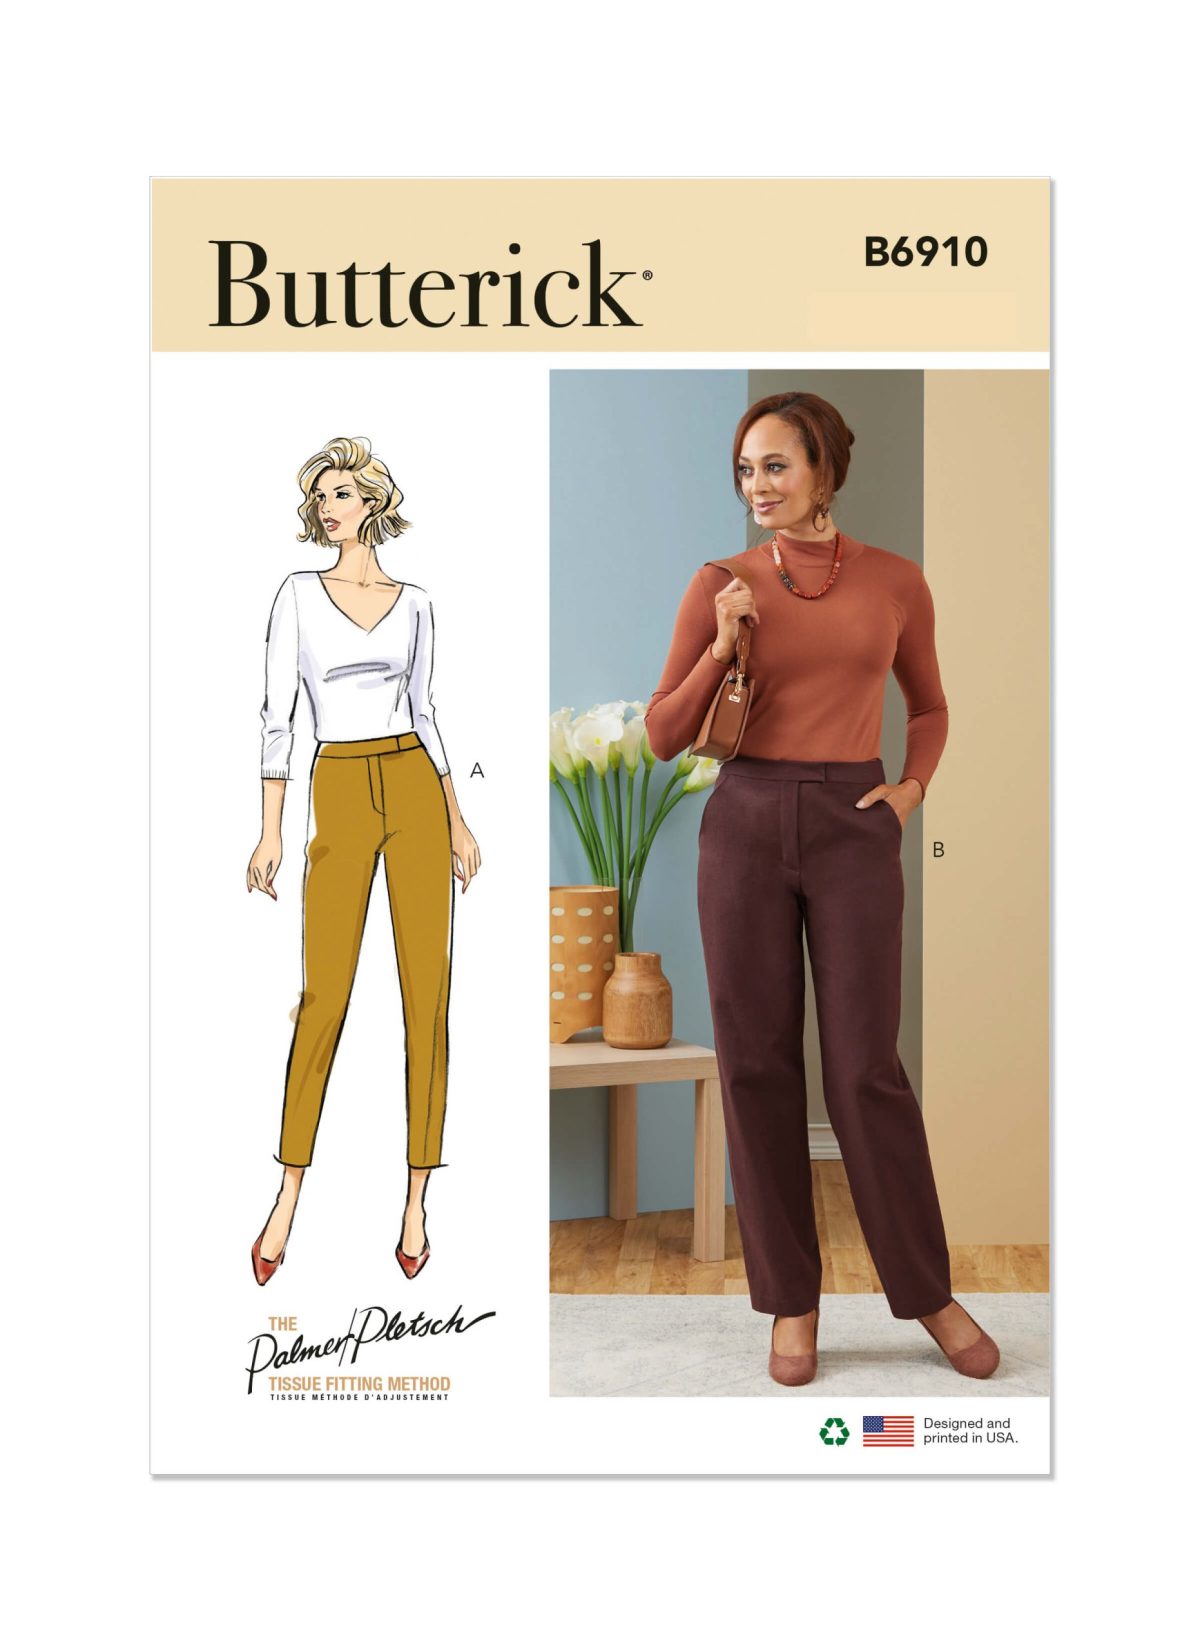 Butterick Sewing Pattern B6910 Misses' Contour Band Pants by Palmer/Pletsch